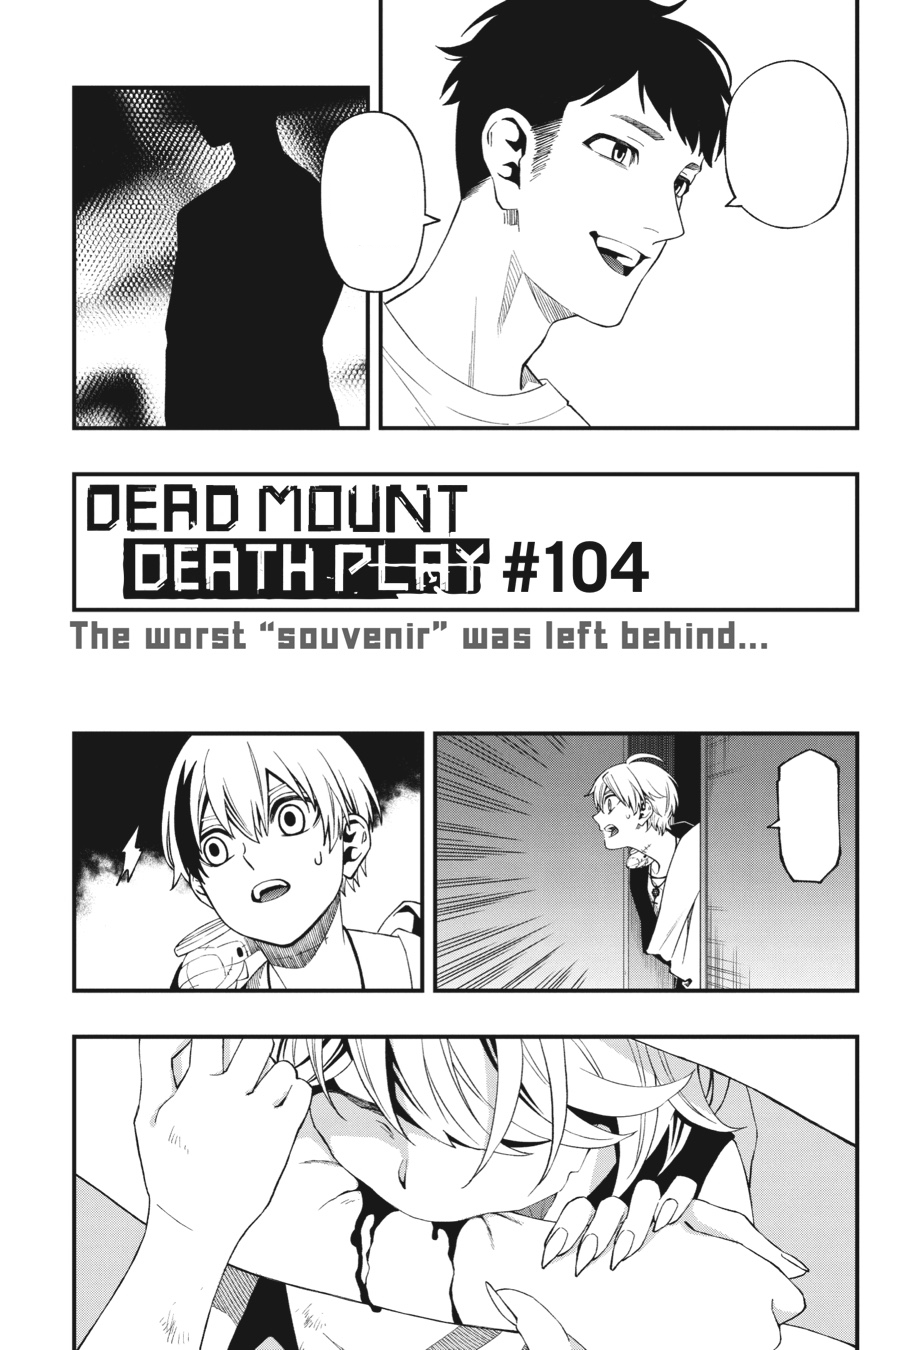 Dead Mount Death Play」Episode 18 Preview : r/anime